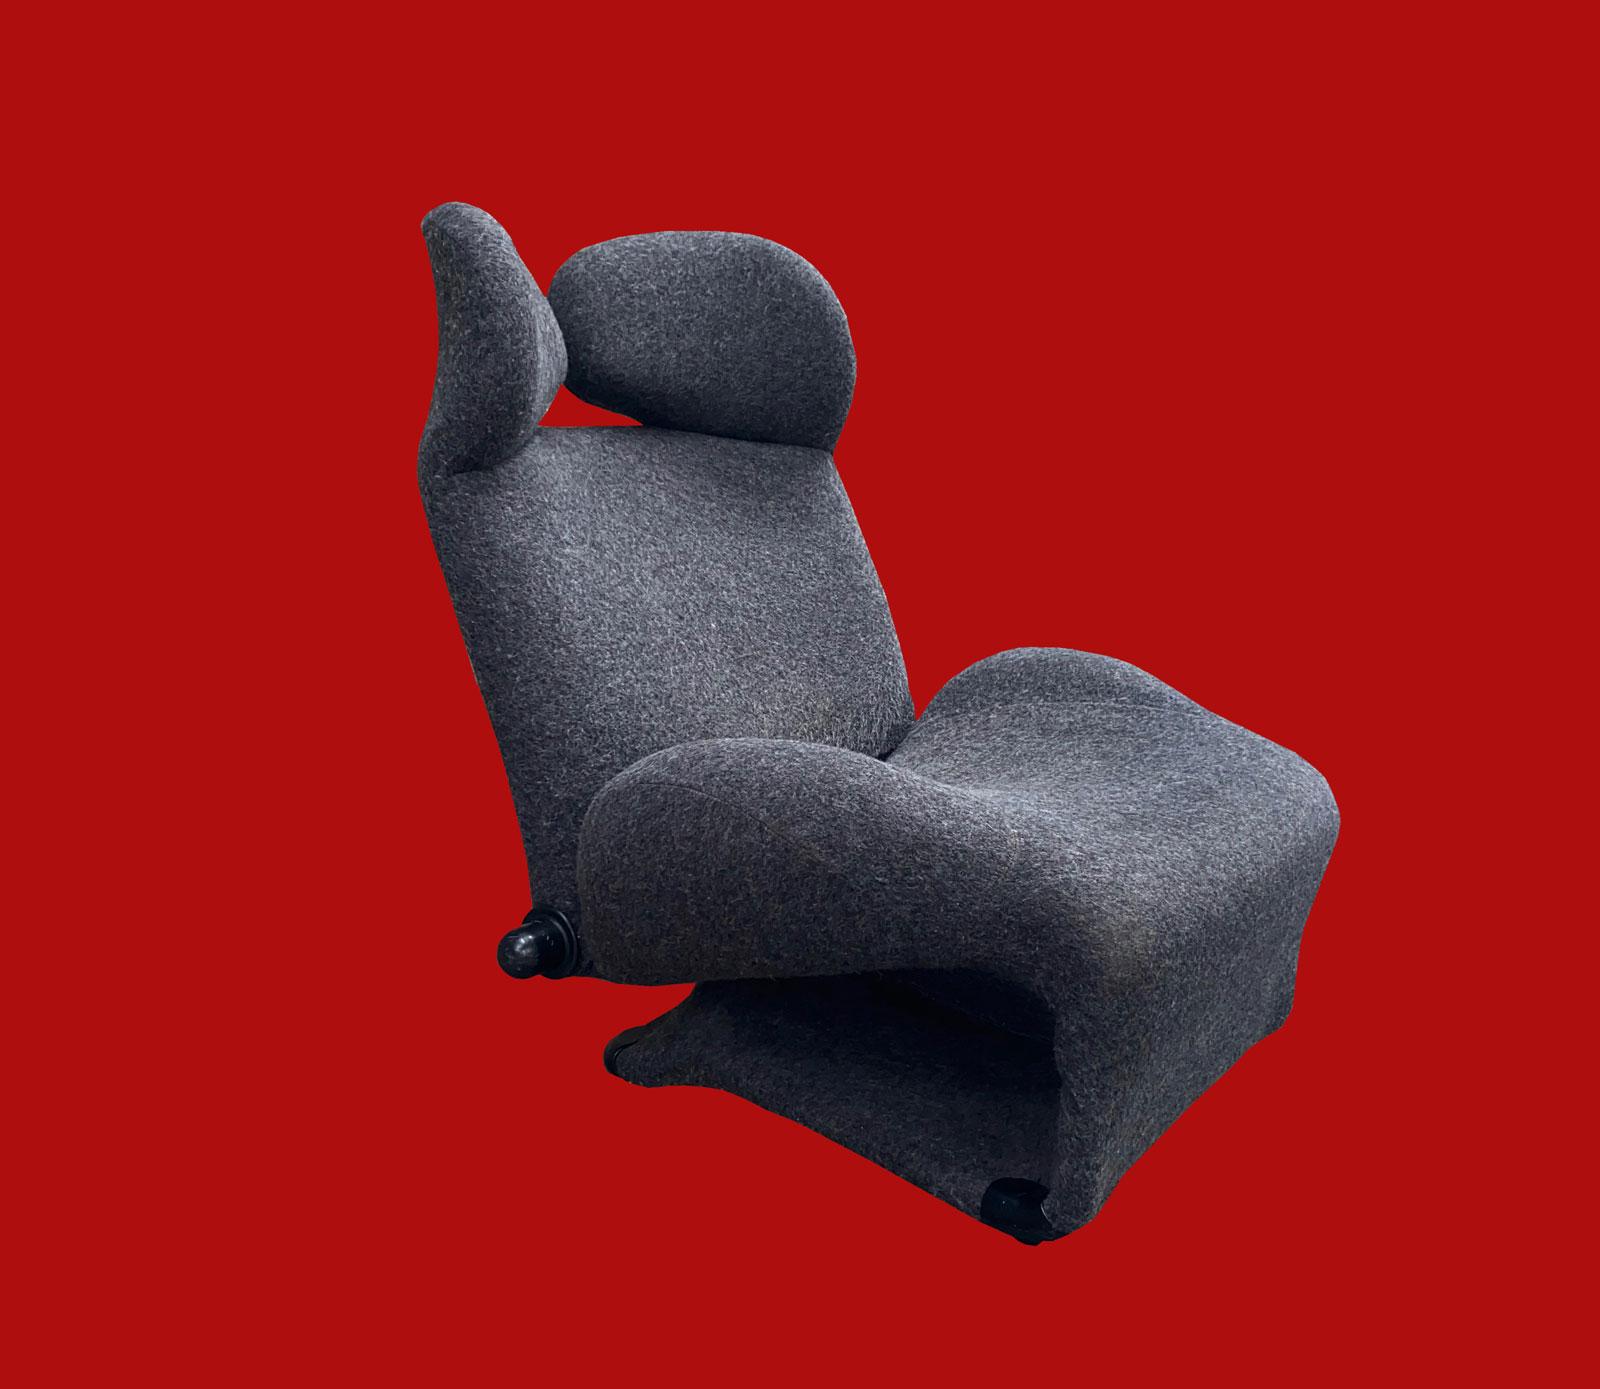 Wink lounge chair by Toshiyuti Kita from Cassina, 1980s
Famous organic and sculptural armchair by Wink by Toshiyuti Kita from Cassina, 1980s Version redone in boiled wool fabric.